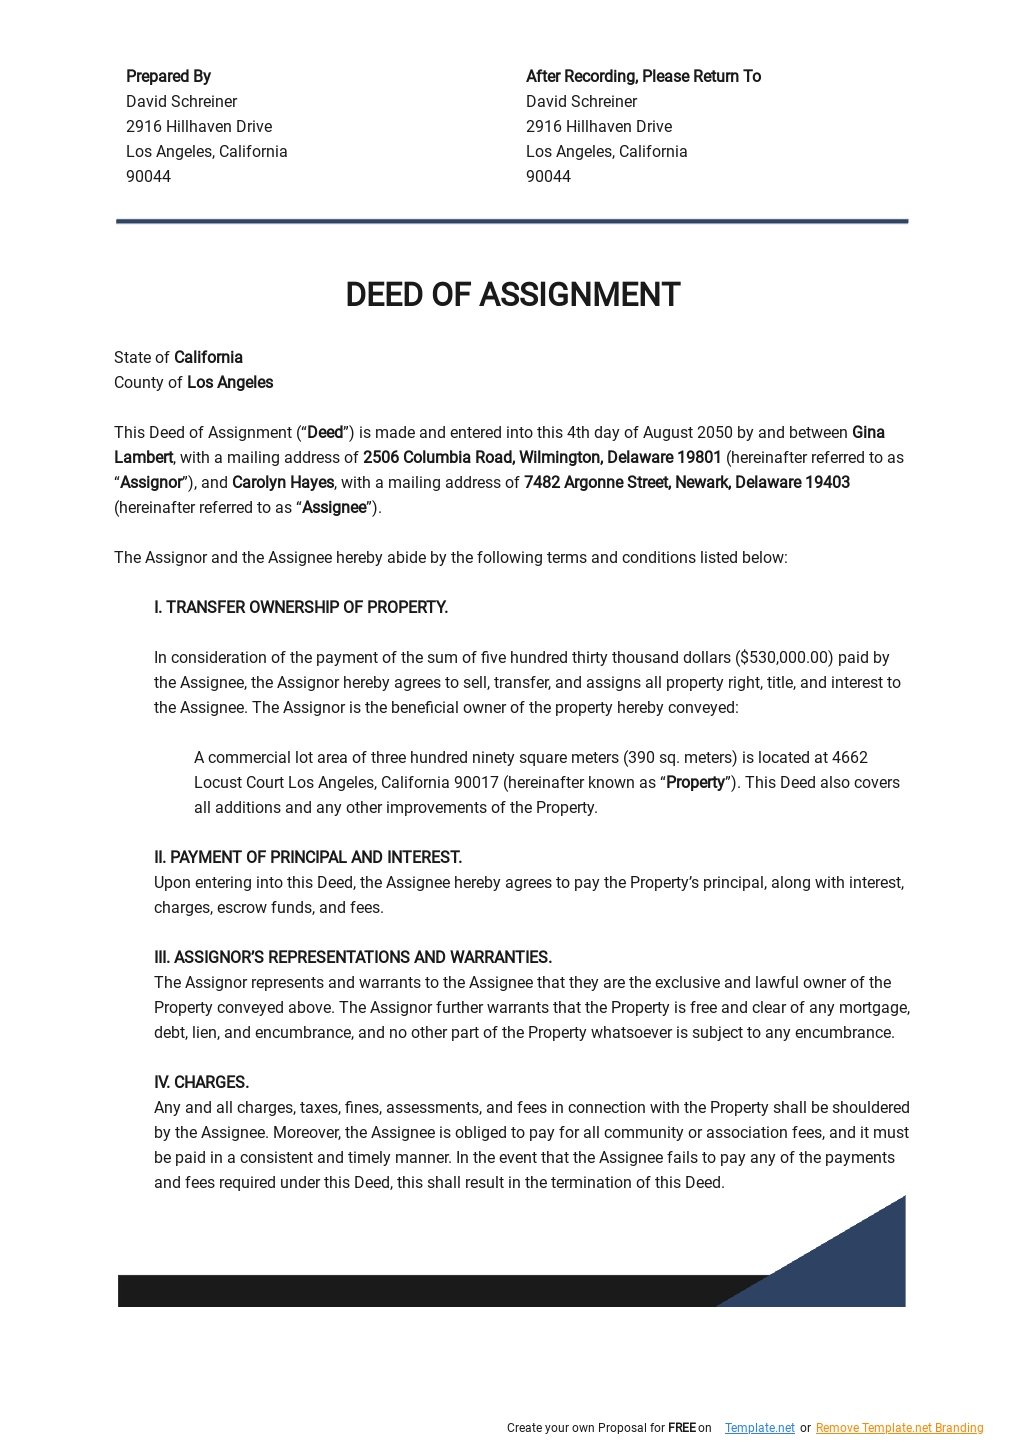 deed of assignment debt collection